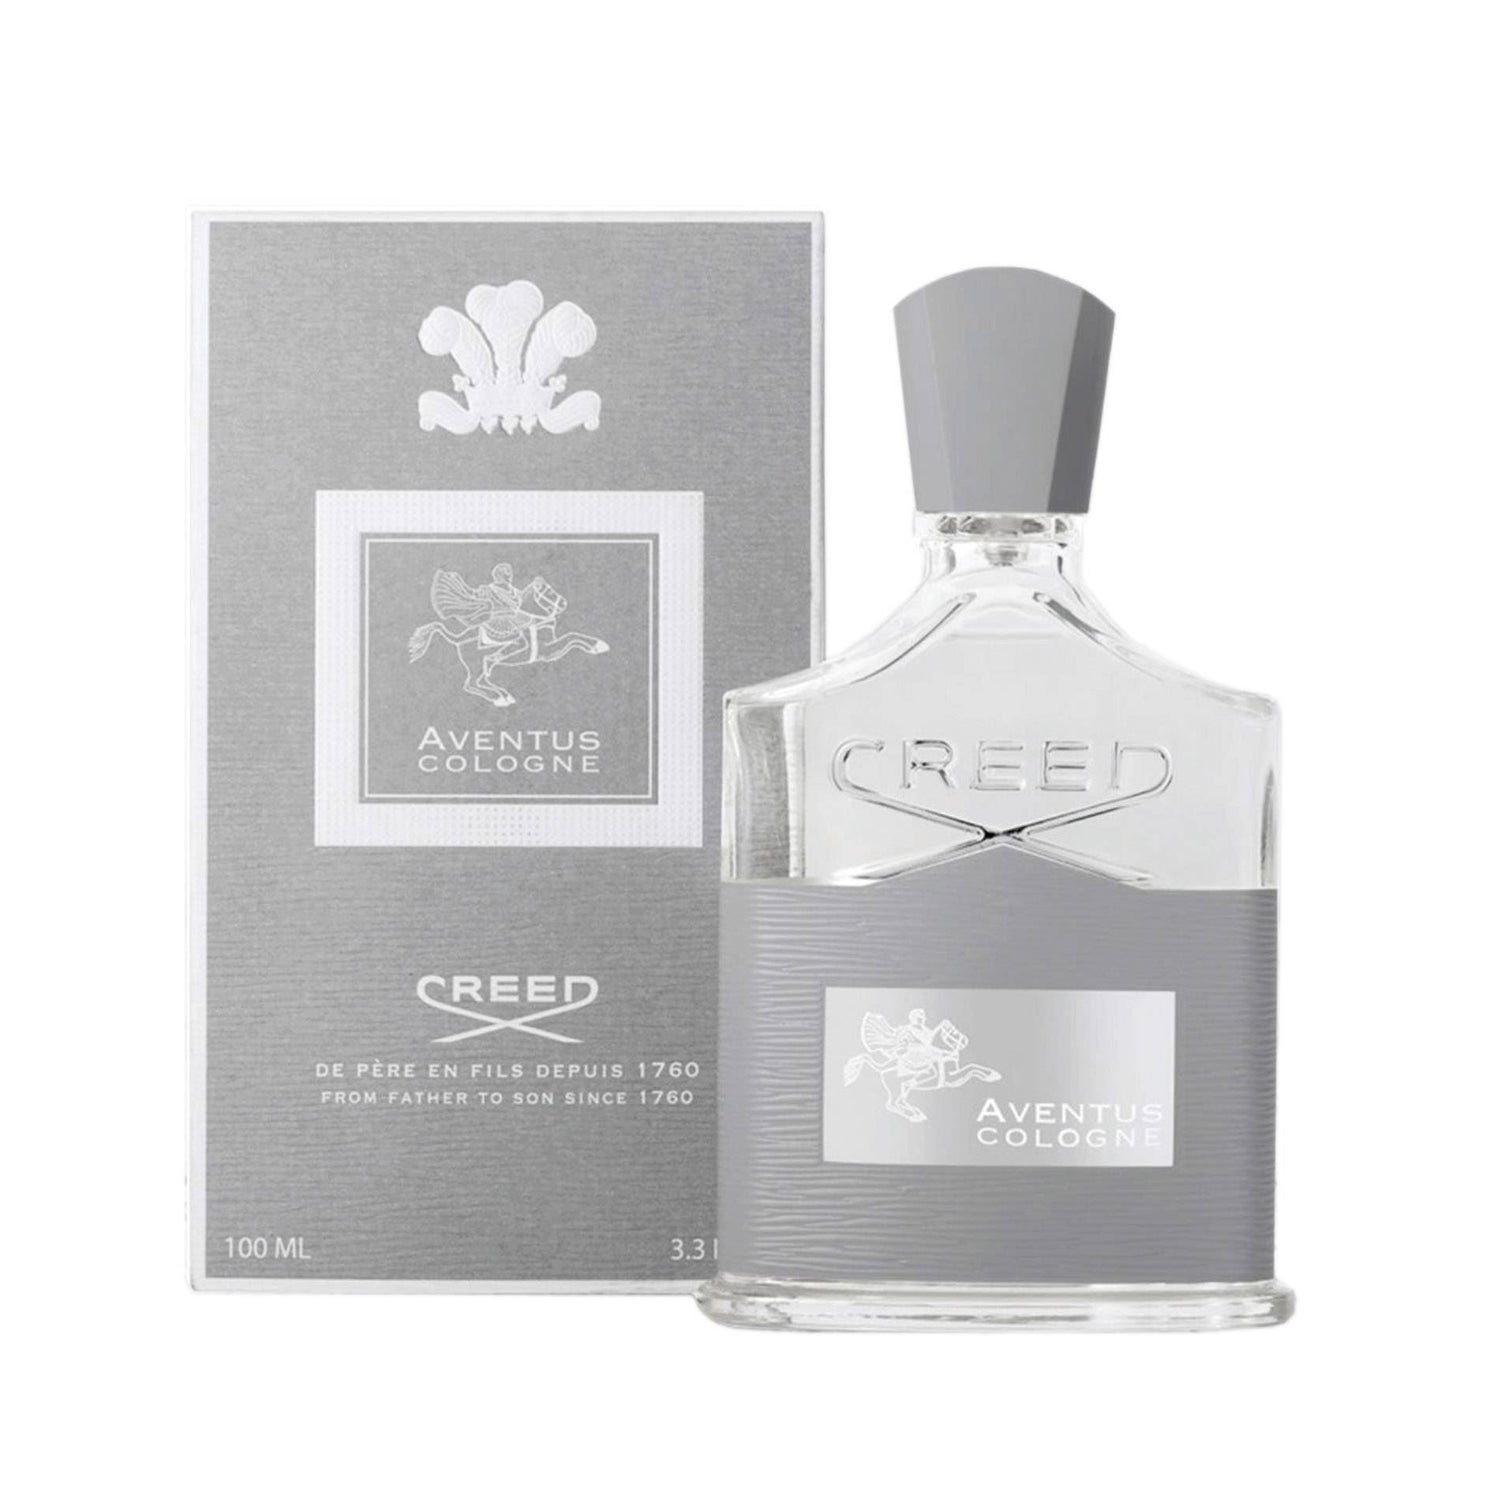 Creed Aventus Cologne, 48% OFF